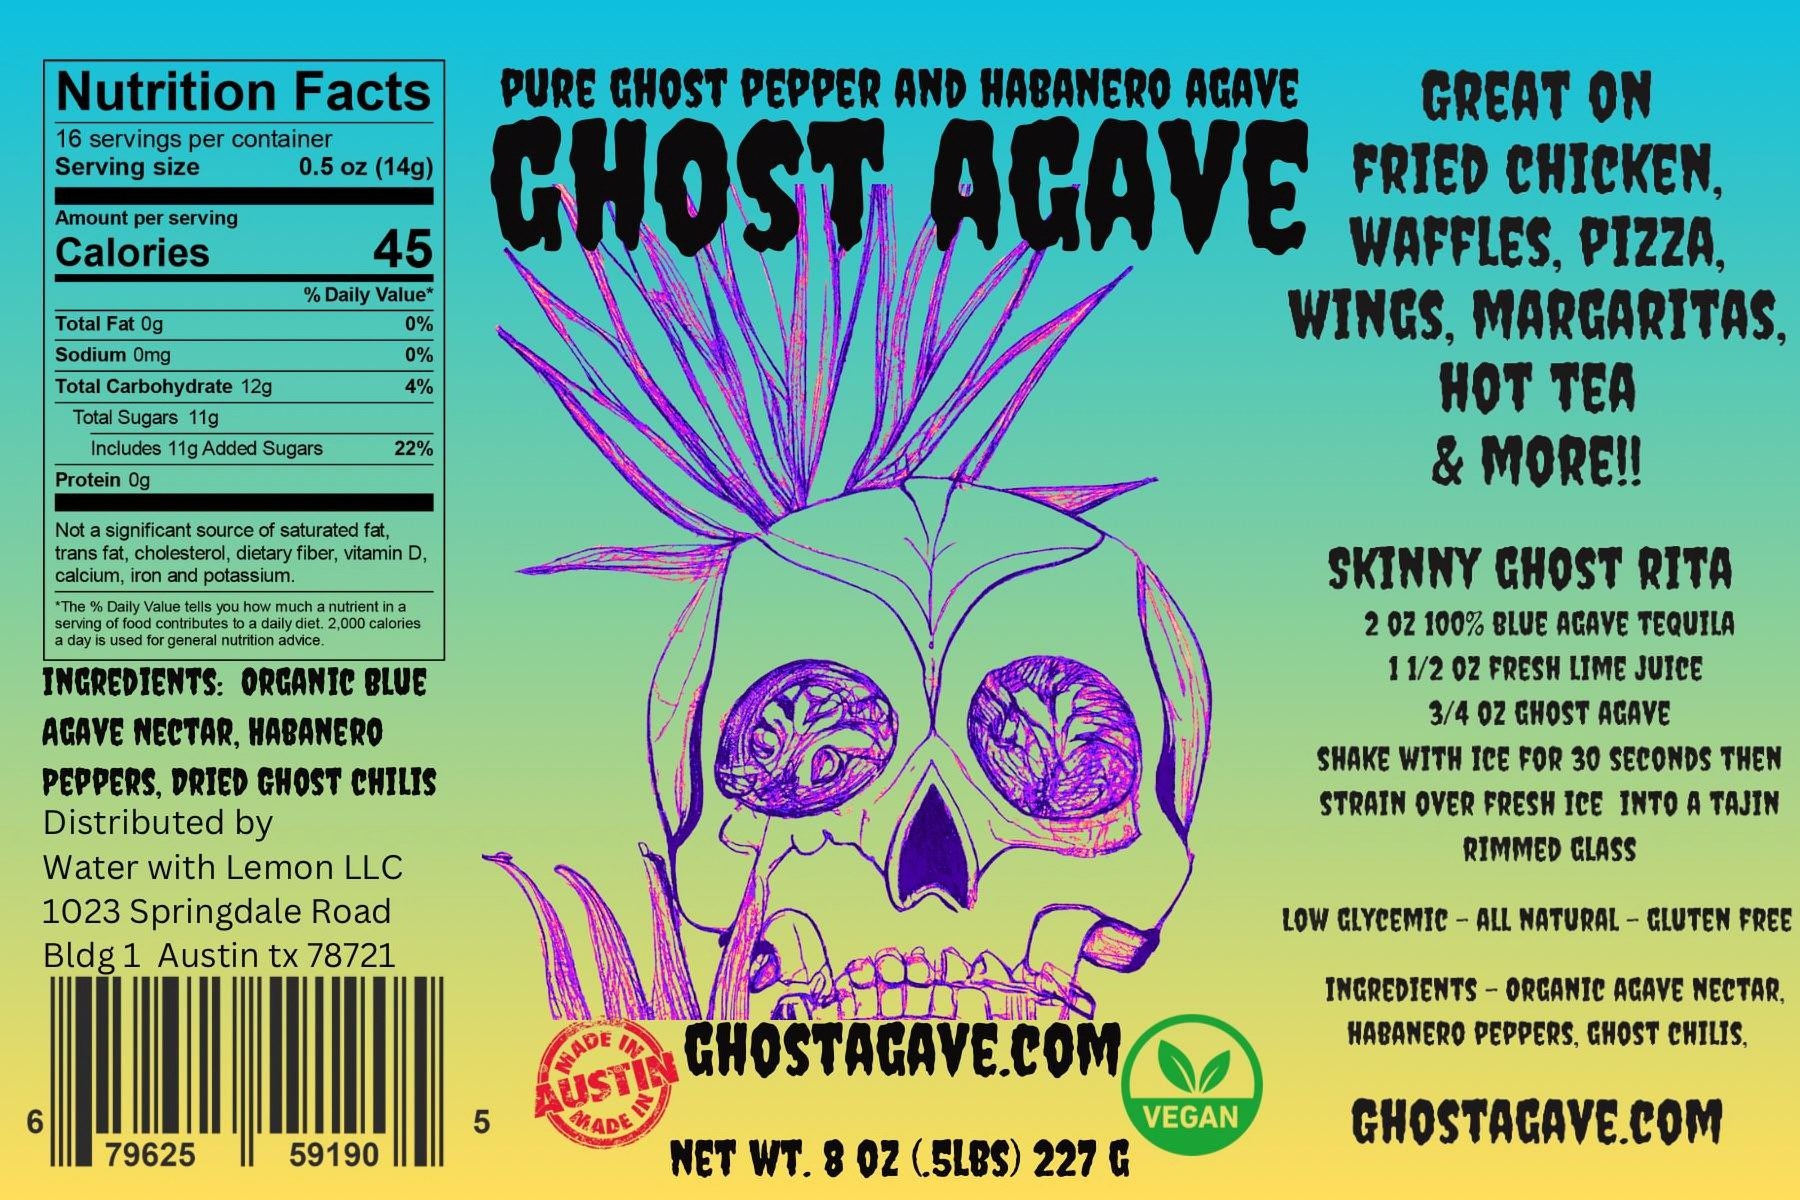  GHOST AGAVE PURE GHOST CHILI AND HABANERO AGAVE